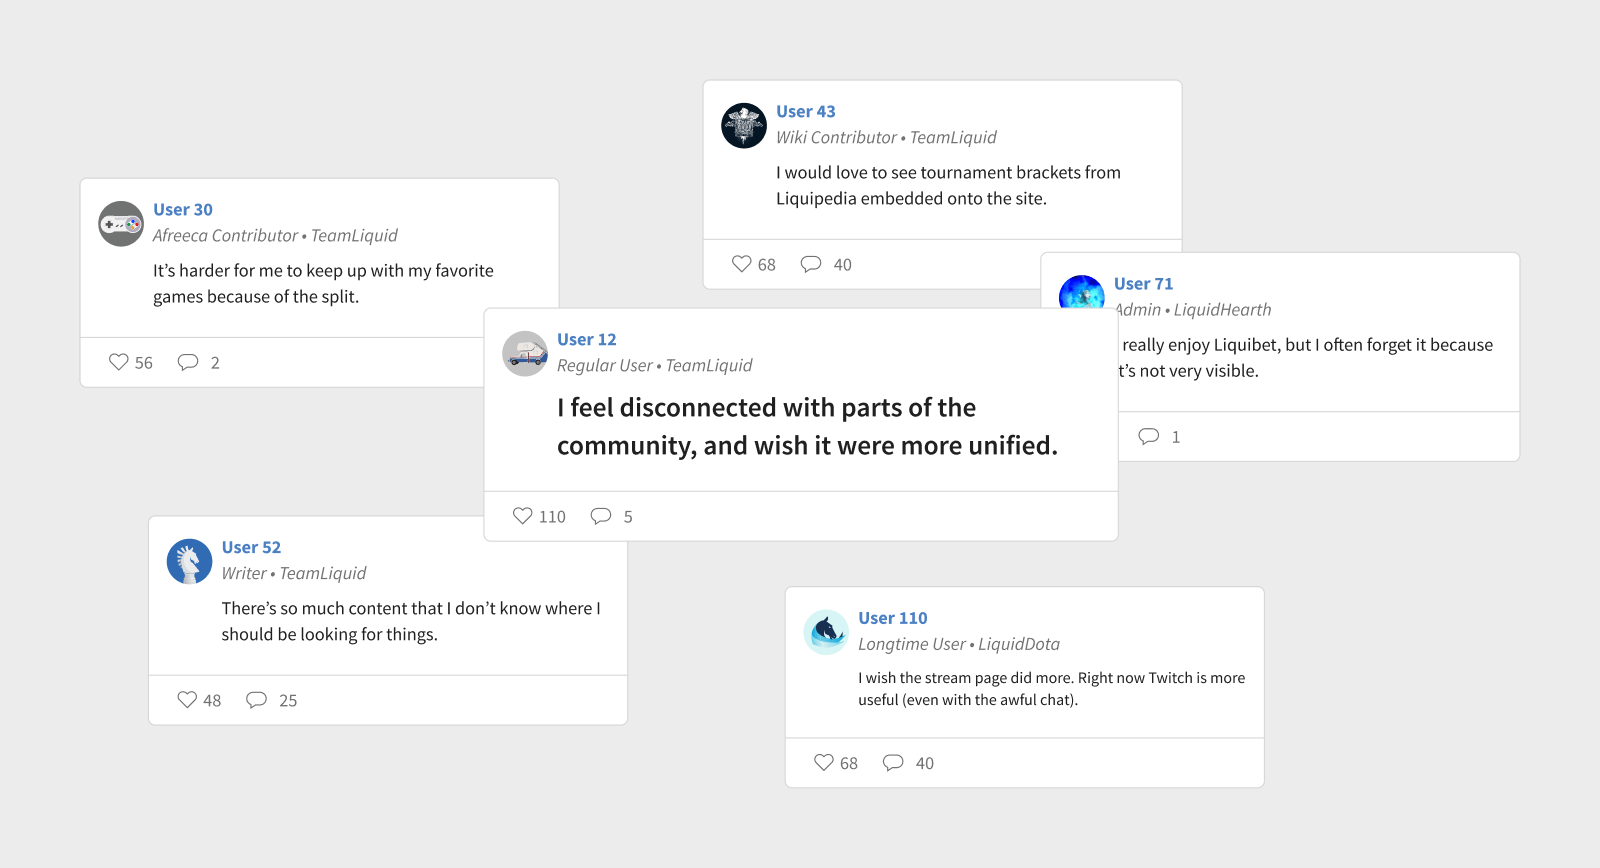 Several research insights from various users in the community, shown as social media posts.